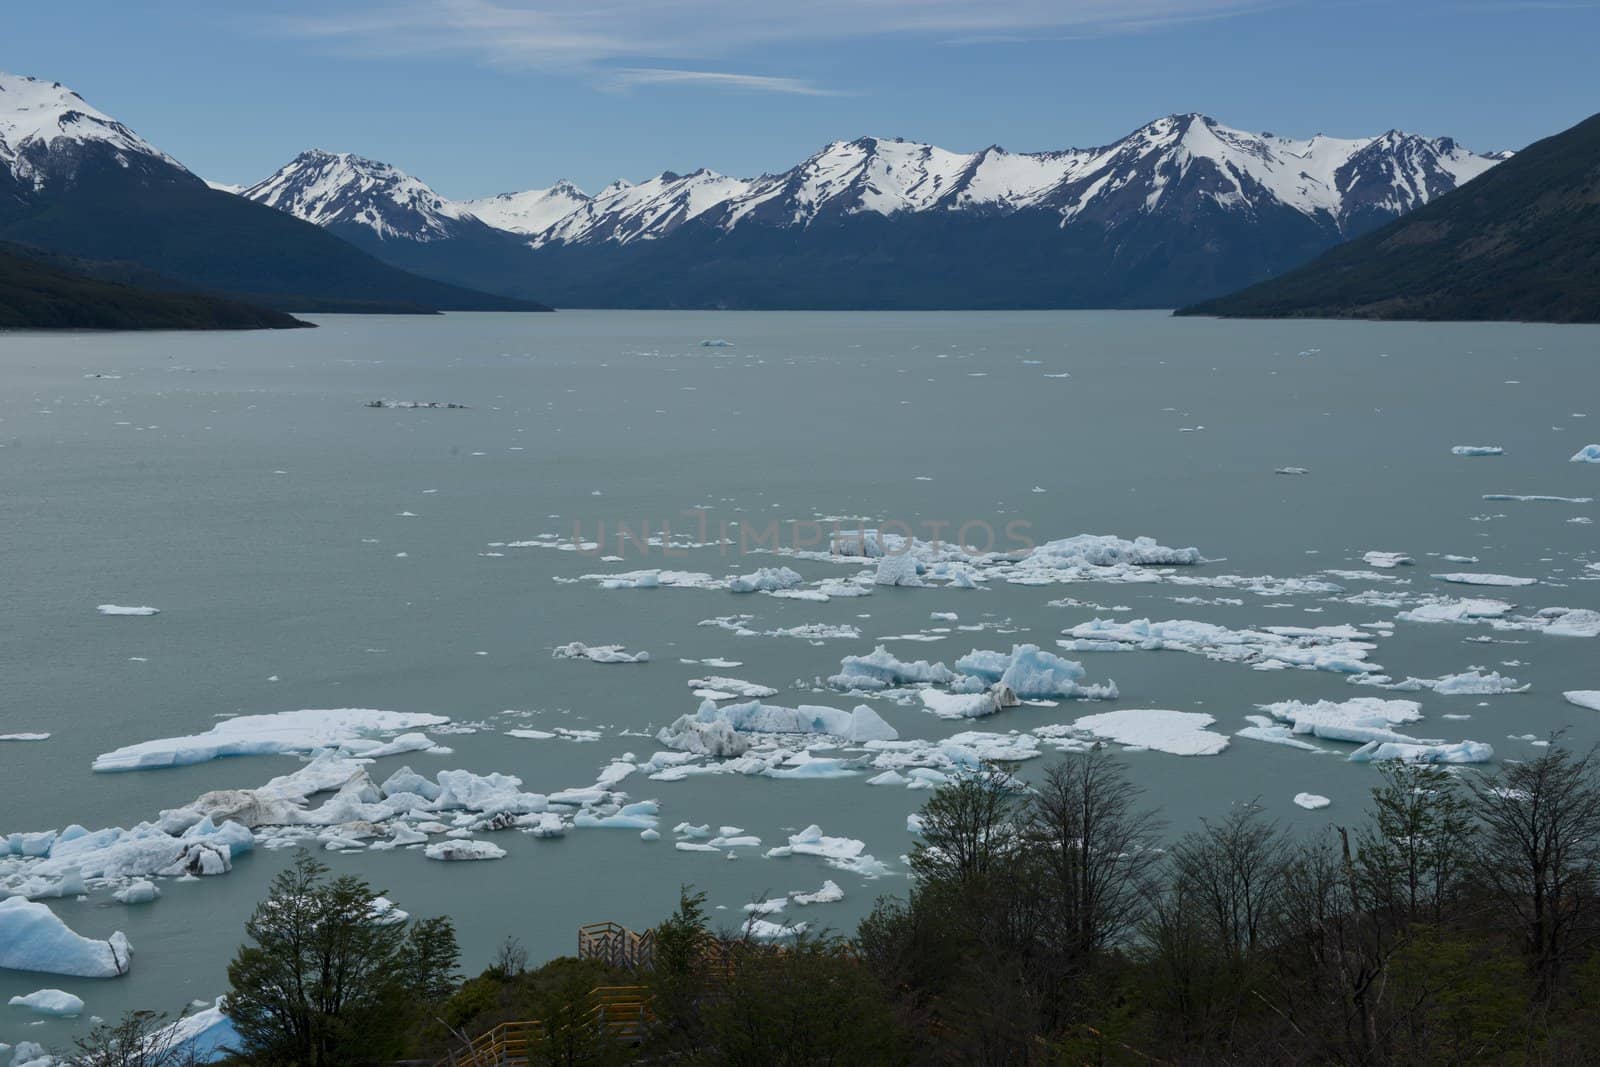 Spectacular blue icebergs floating on the Lake Argentino in the Los Glaciares National Park, Patagonia, Argentina.